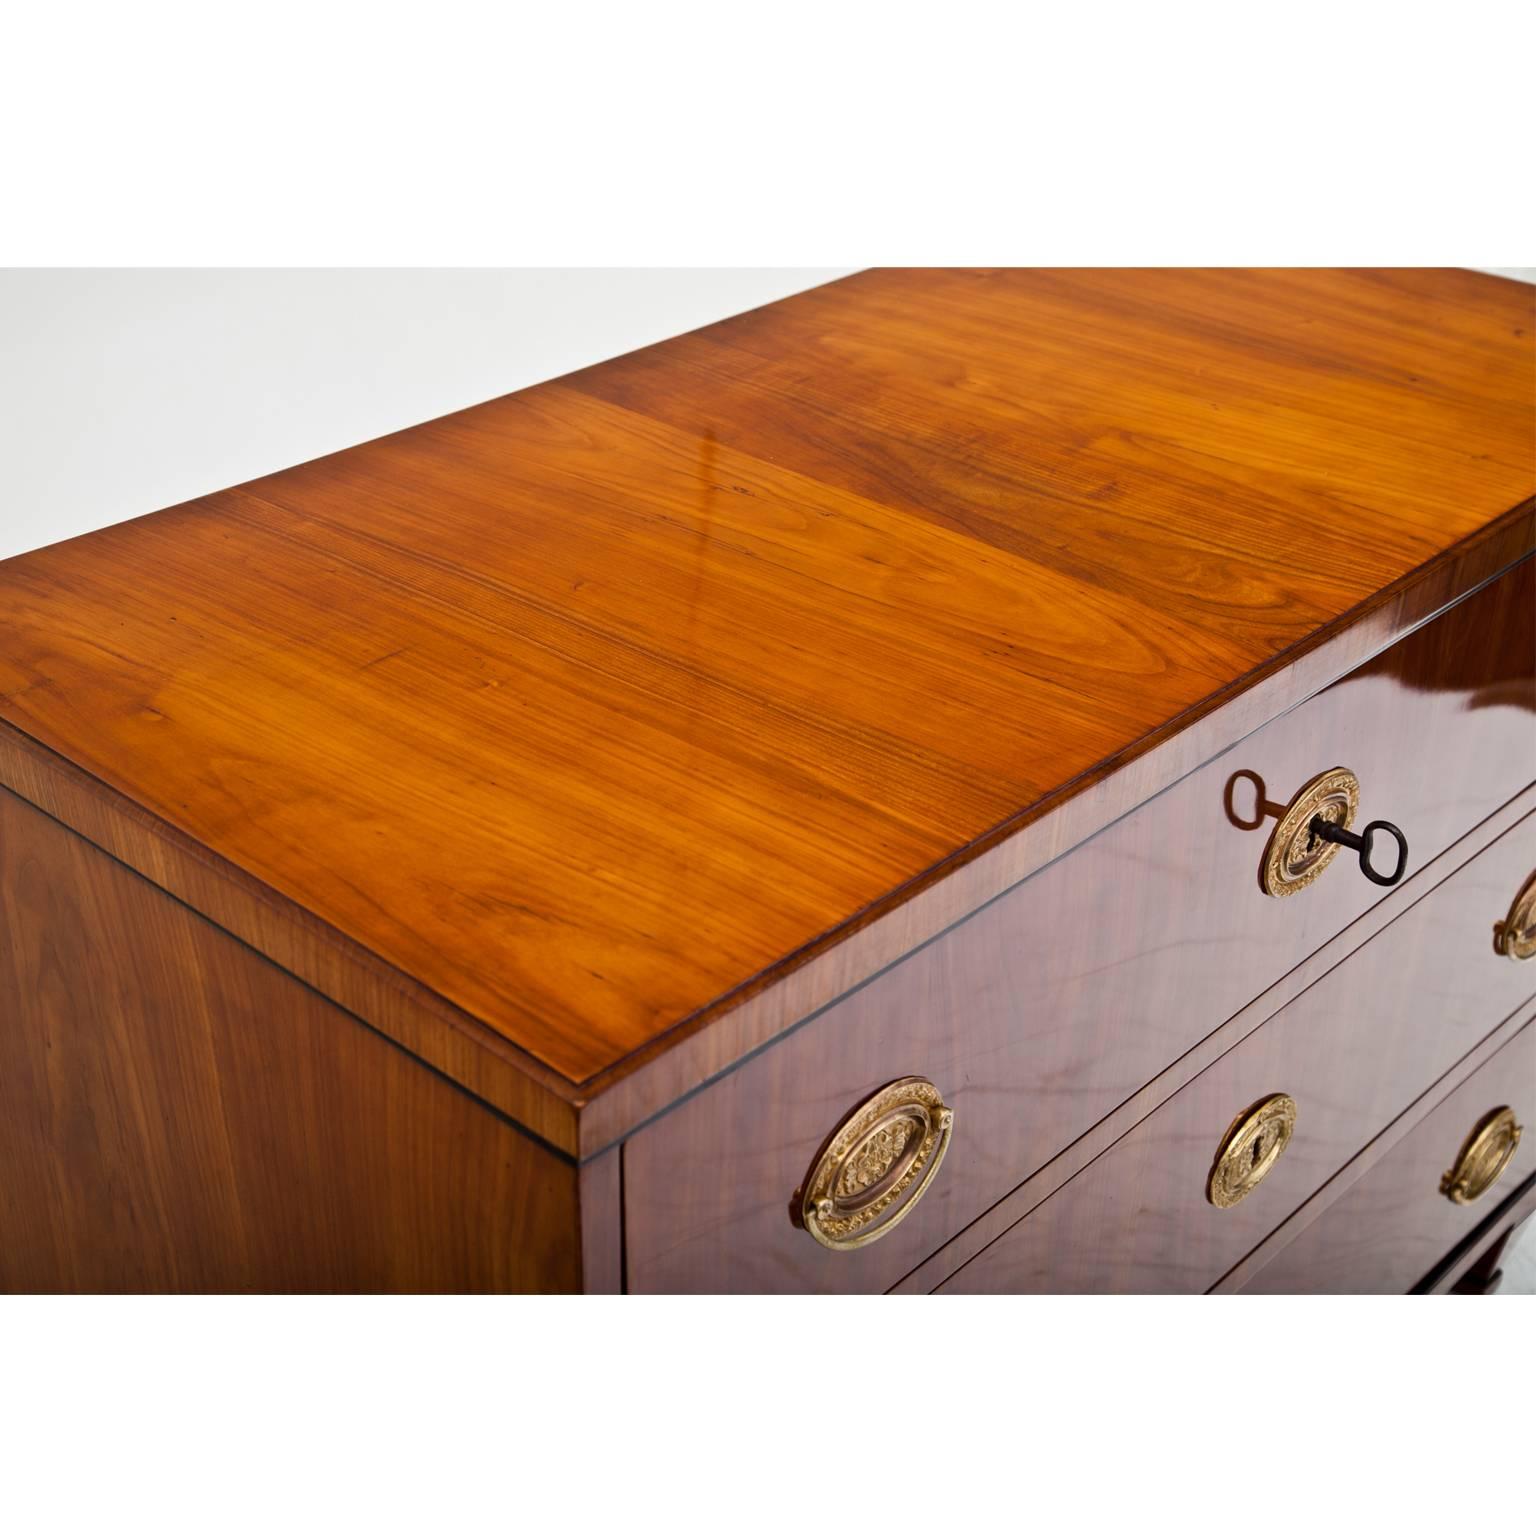 Three-drawered chest of drawers with a streamlined body and ebonized mouldings, standing on tapered feet.